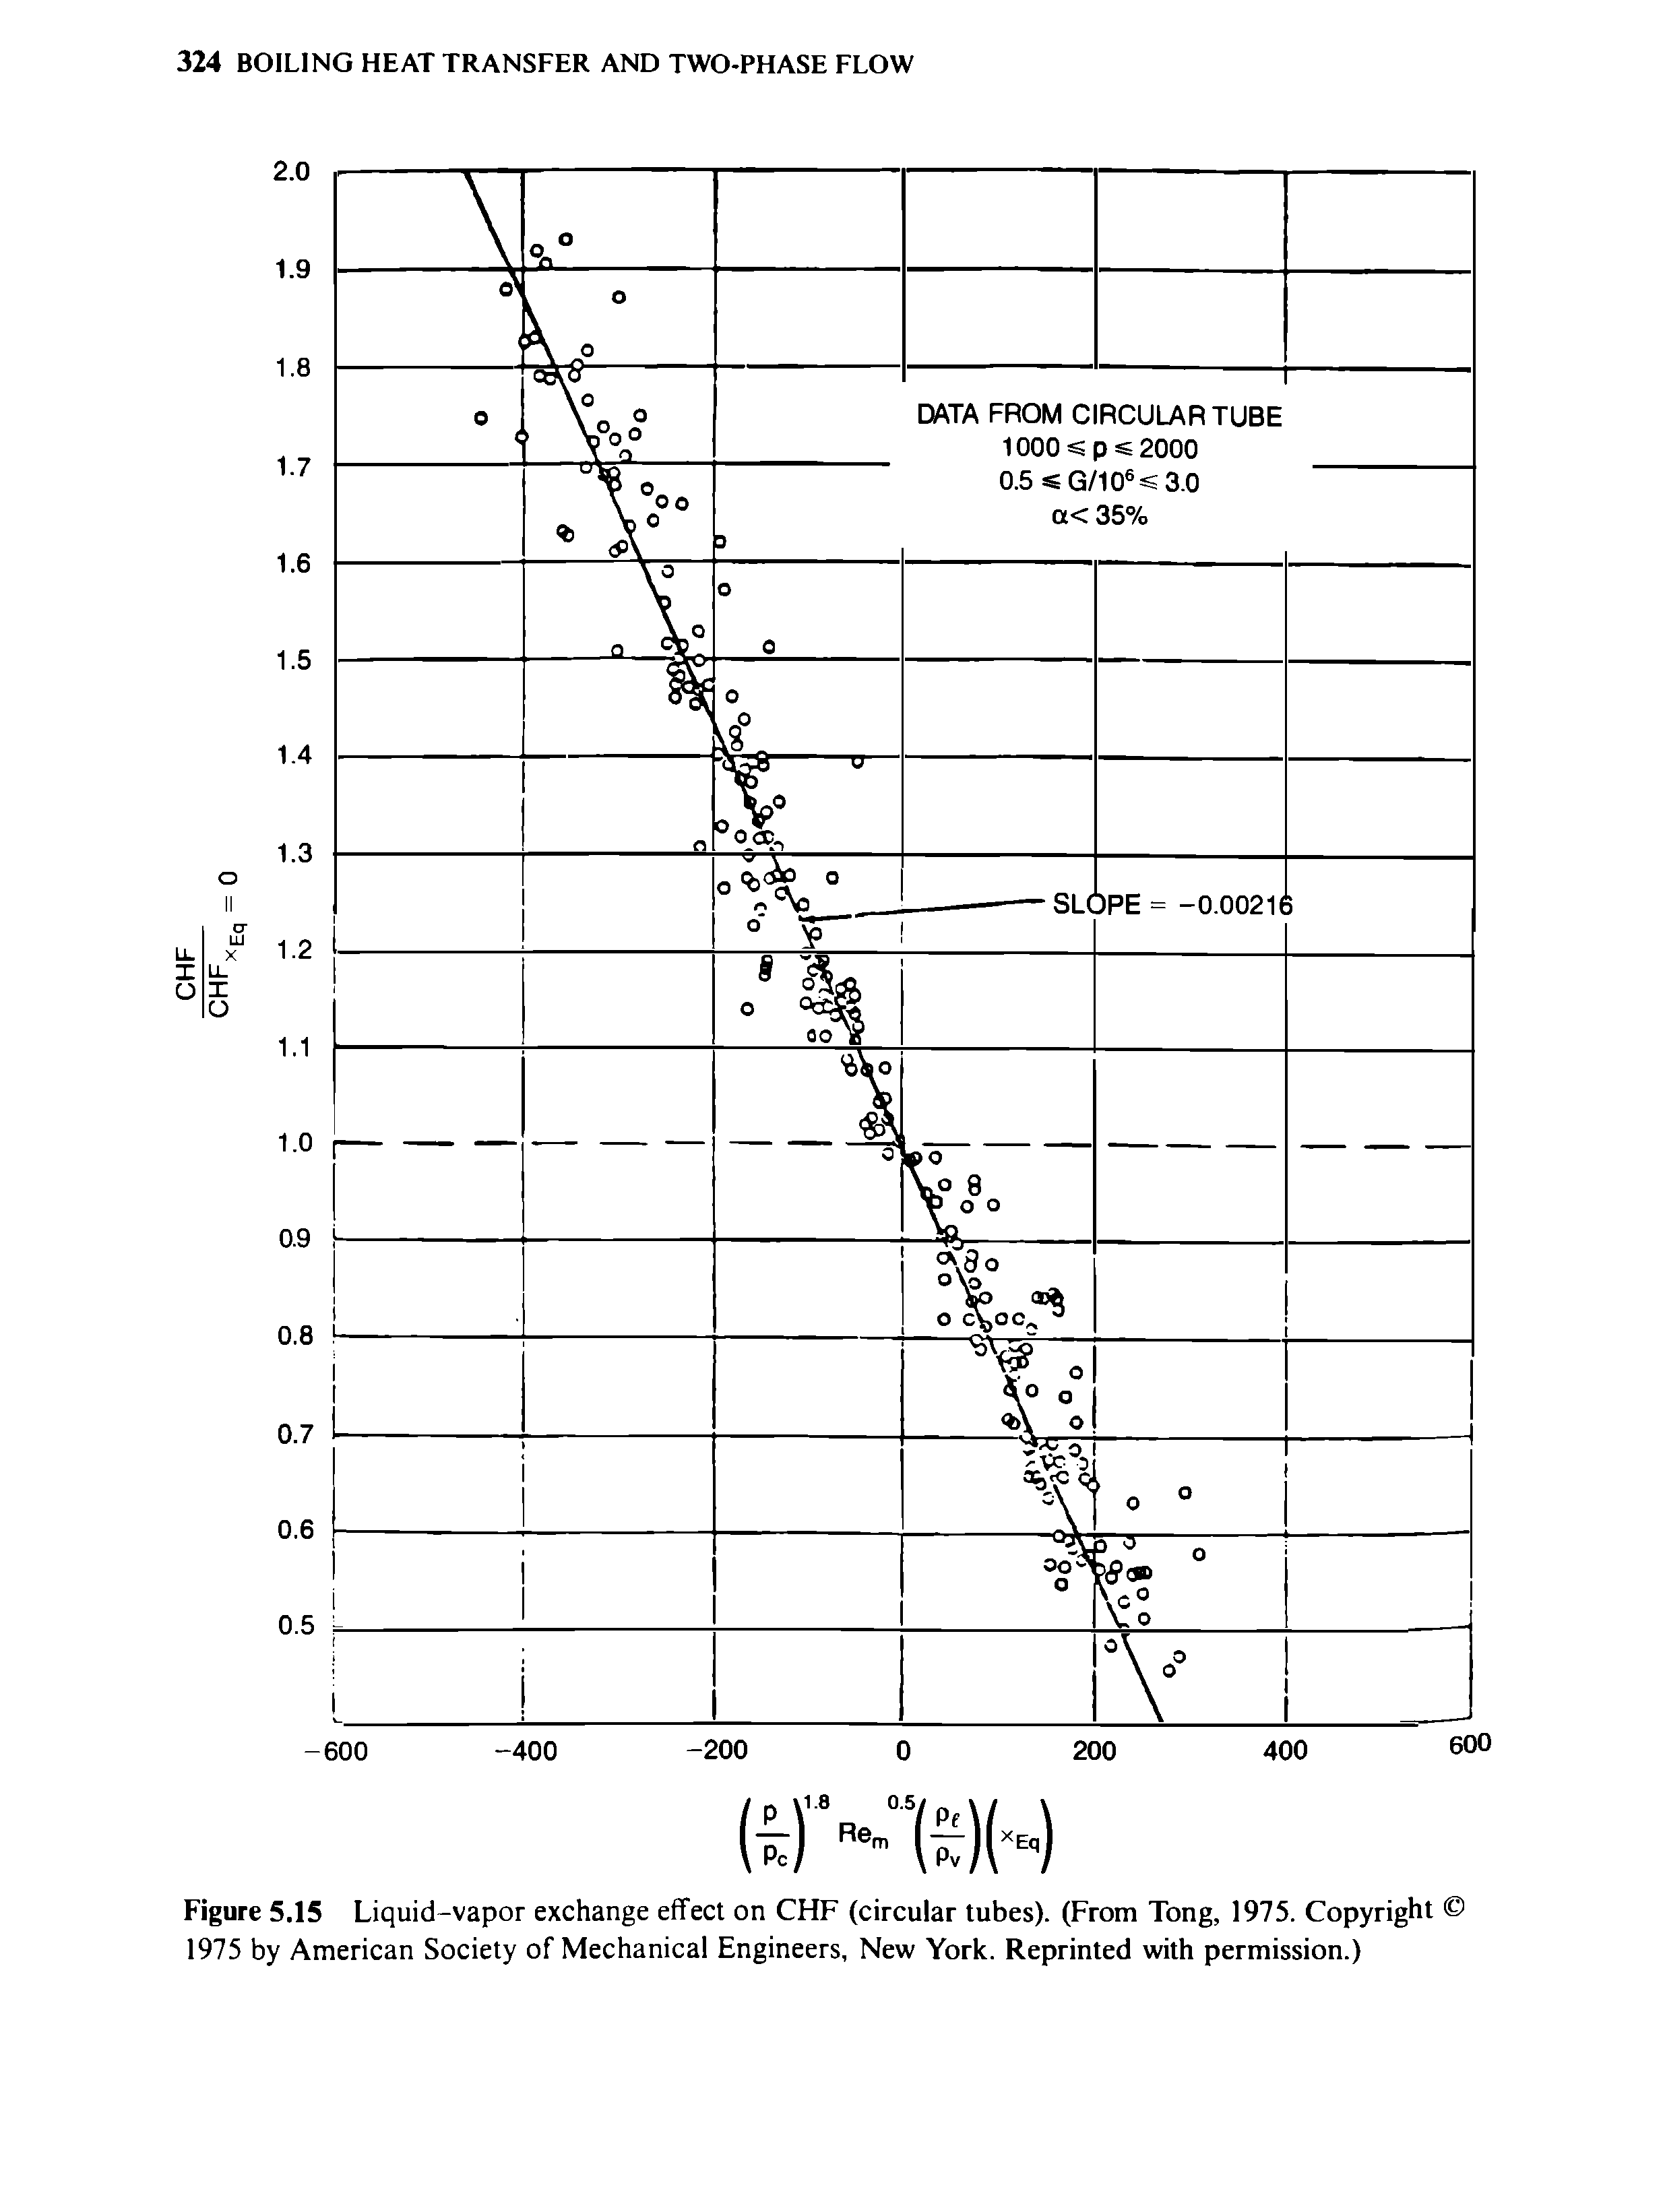 Figure 5.15 Liquid-vapor exchange effect on CHF (circular tubes). (From Tong, 1975. Copyright 1975 by American Society of Mechanical Engineers, New York. Reprinted with permission.)...